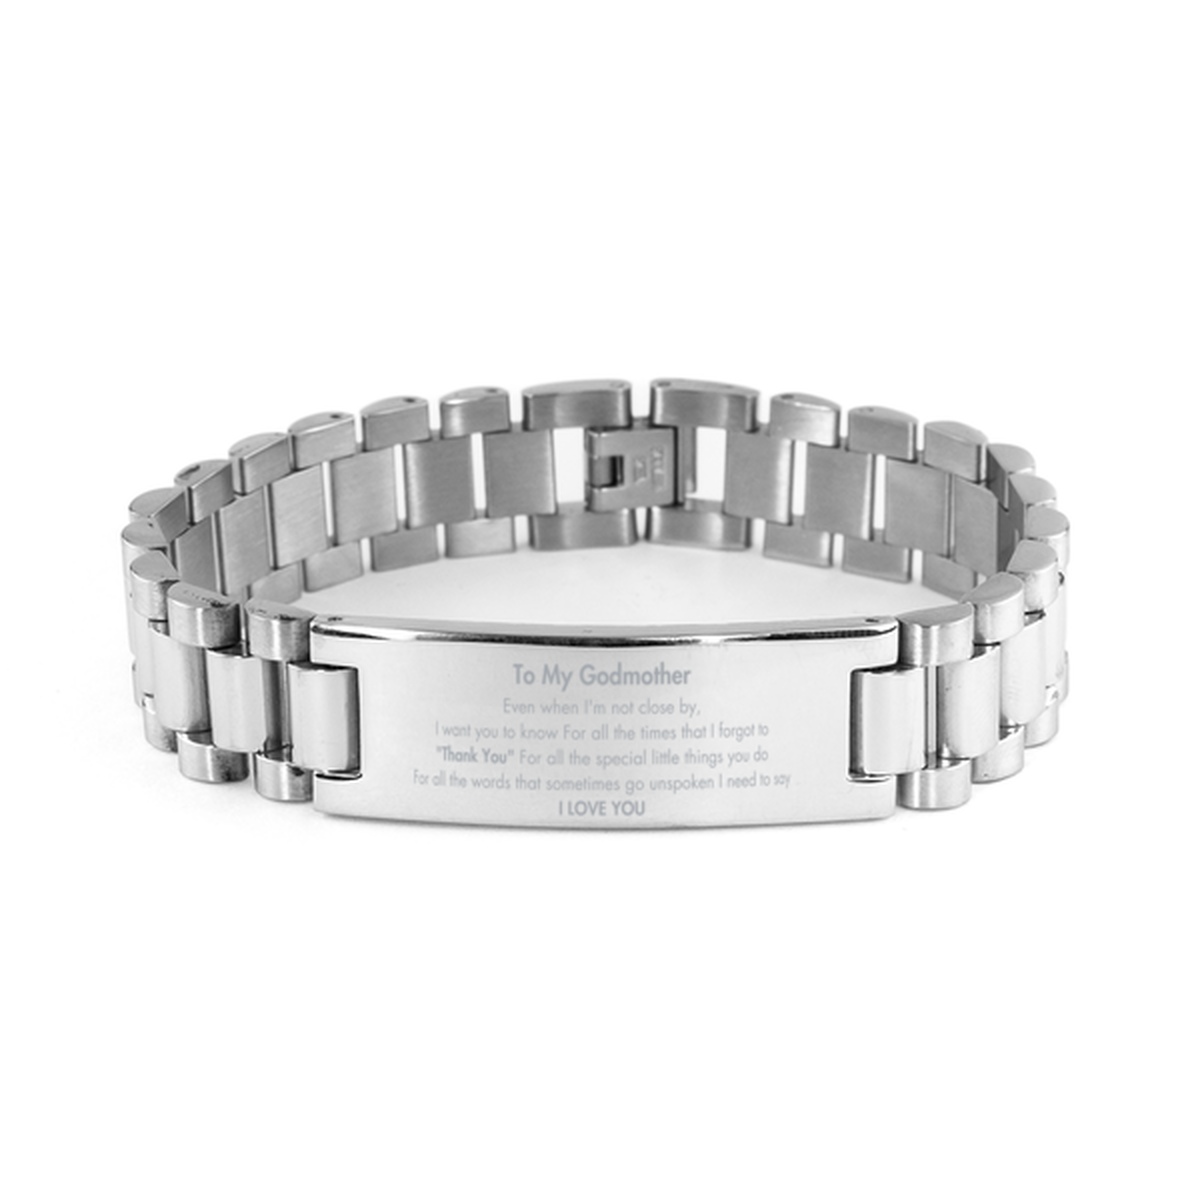 Thank You Gifts for Godmother, Keepsake Ladder Stainless Steel Bracelet Gifts for Godmother Birthday Mother's day Father's Day Godmother For all the words That sometimes go unspoken I need to say I LOVE YOU